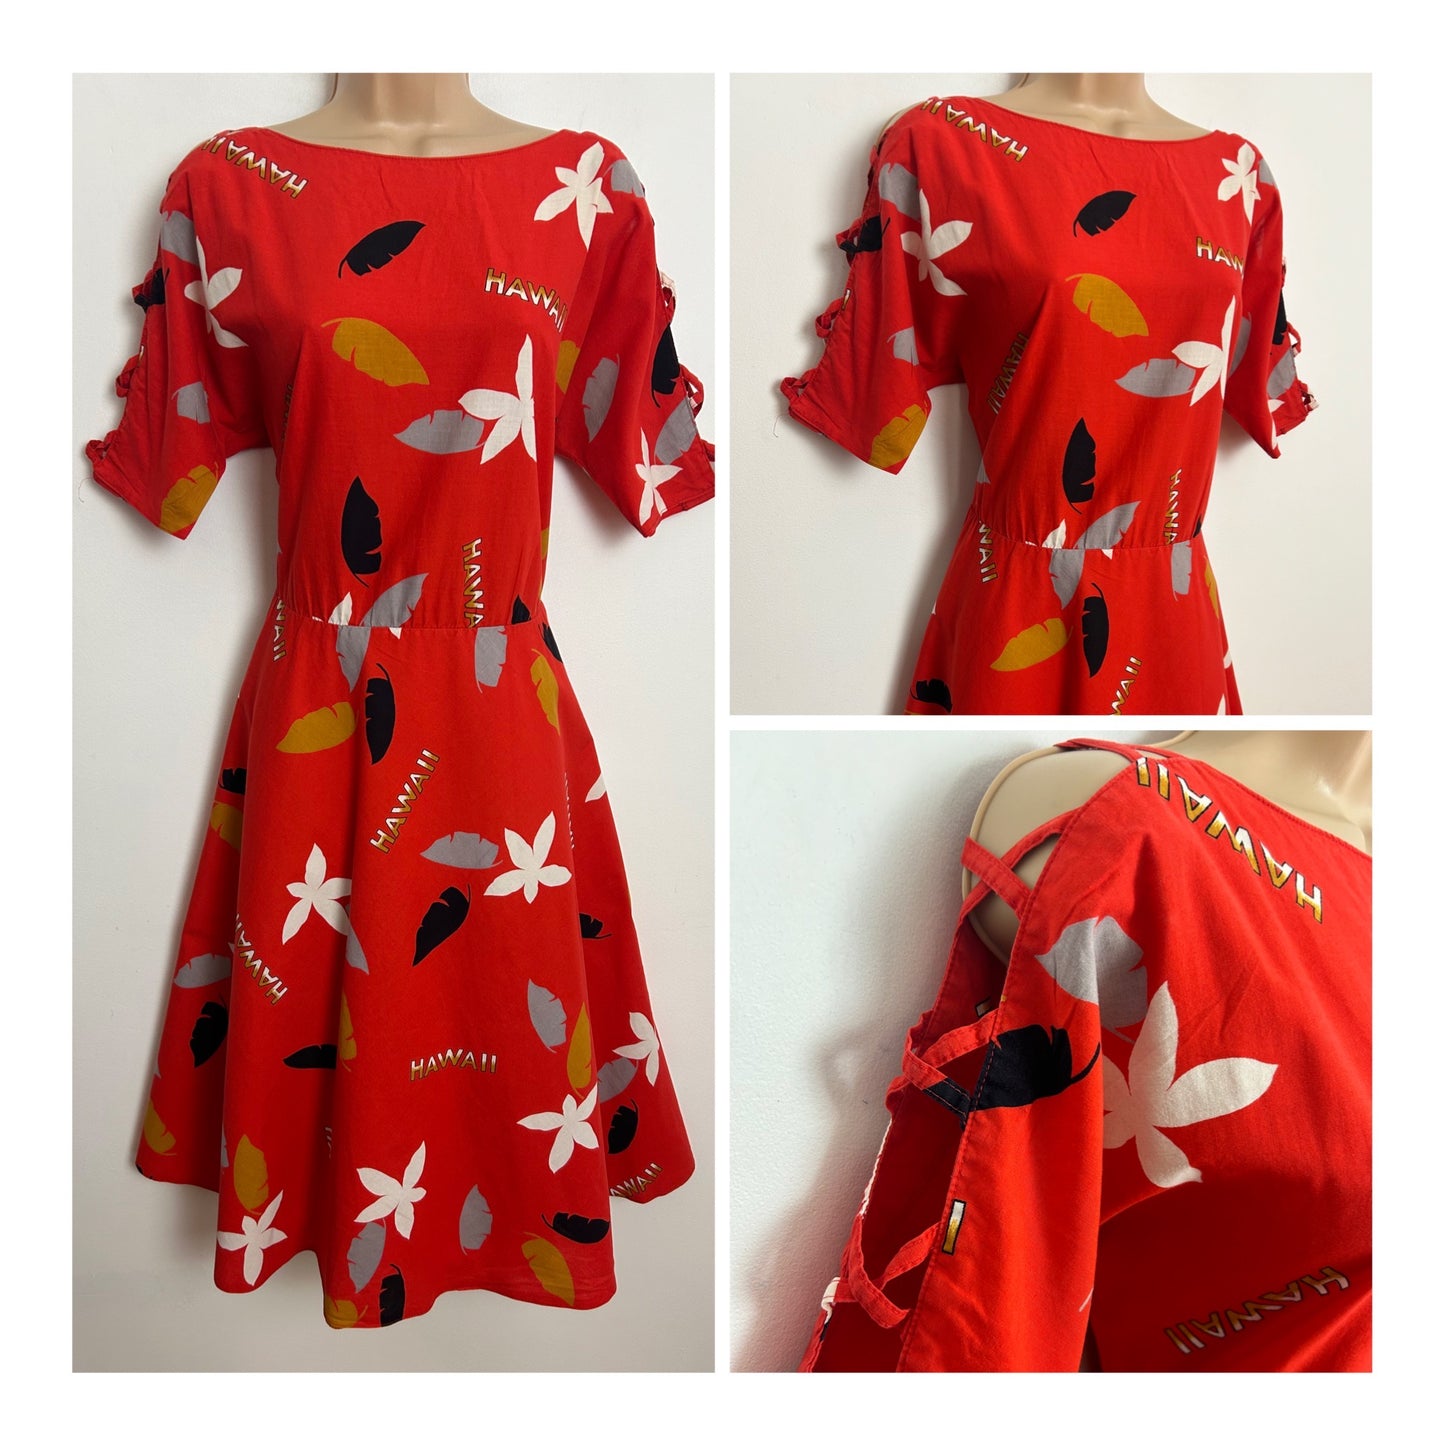 Vintage 1980s UK Size 12-14 Red Floral Leaf "Hawaii" Print Lattice Sleeves Cotton Swing Style Summer Dress